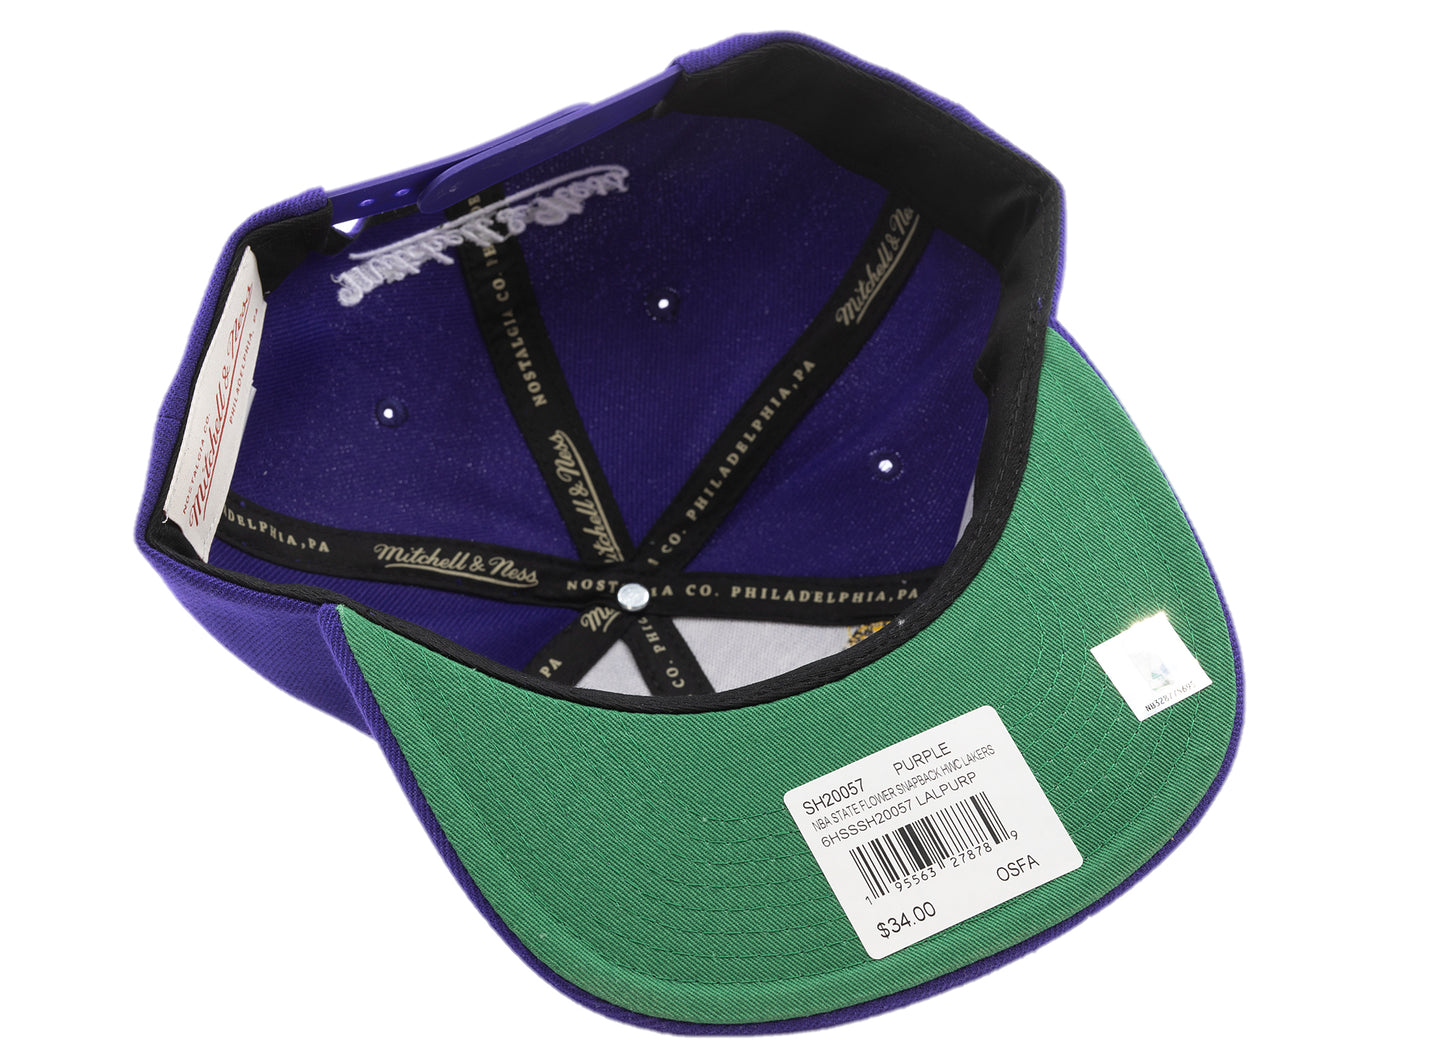 Mitchell & Ness x NBA State Flower Snapback 'Los Angeles Lakers'